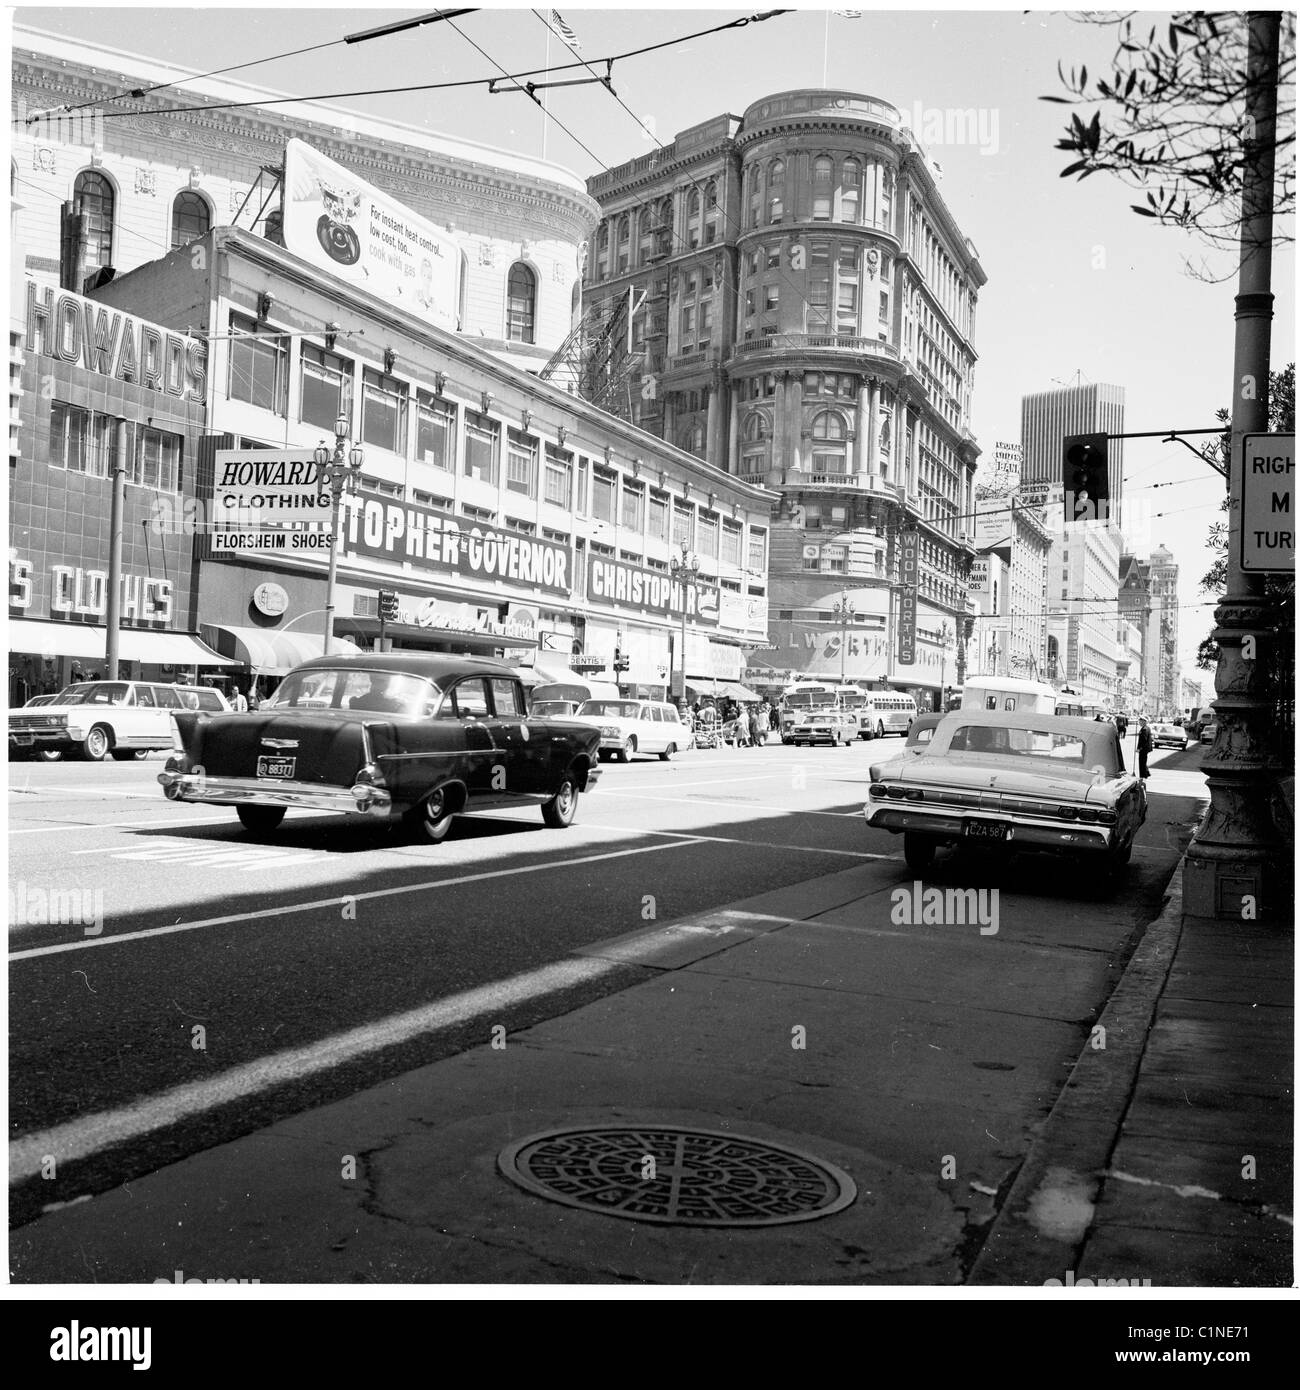 USA, 1950s. Summertime, and a street in San Francisco, California, showing shops, signs and buildings. Stock Photo